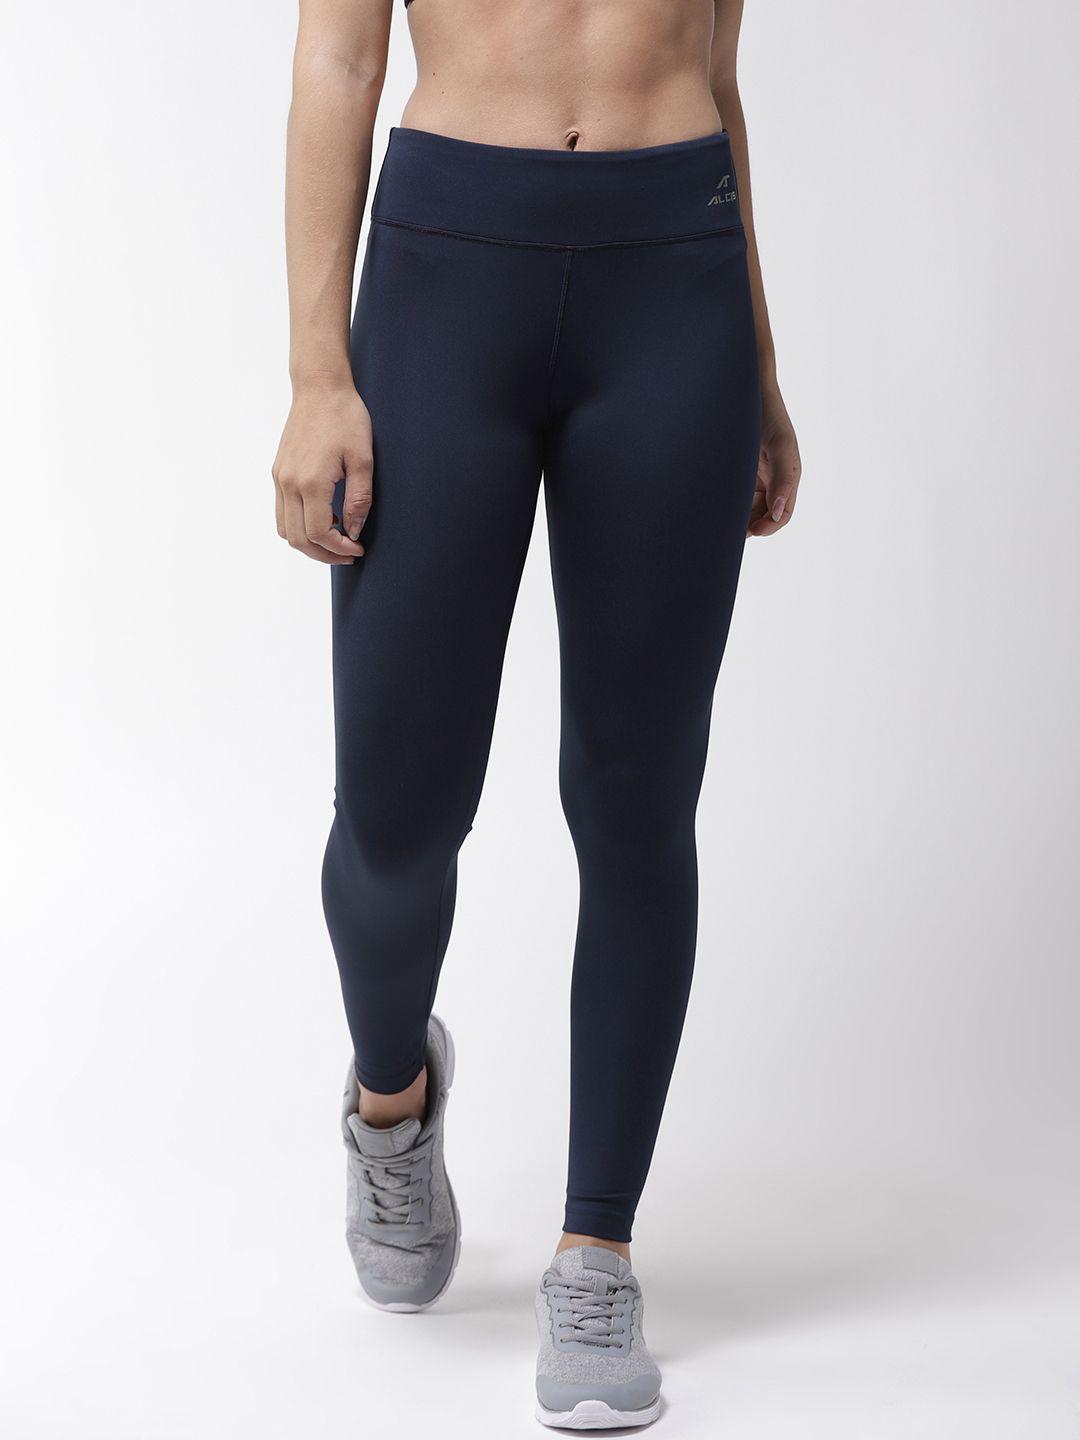 alcis women navy blue solid training tights